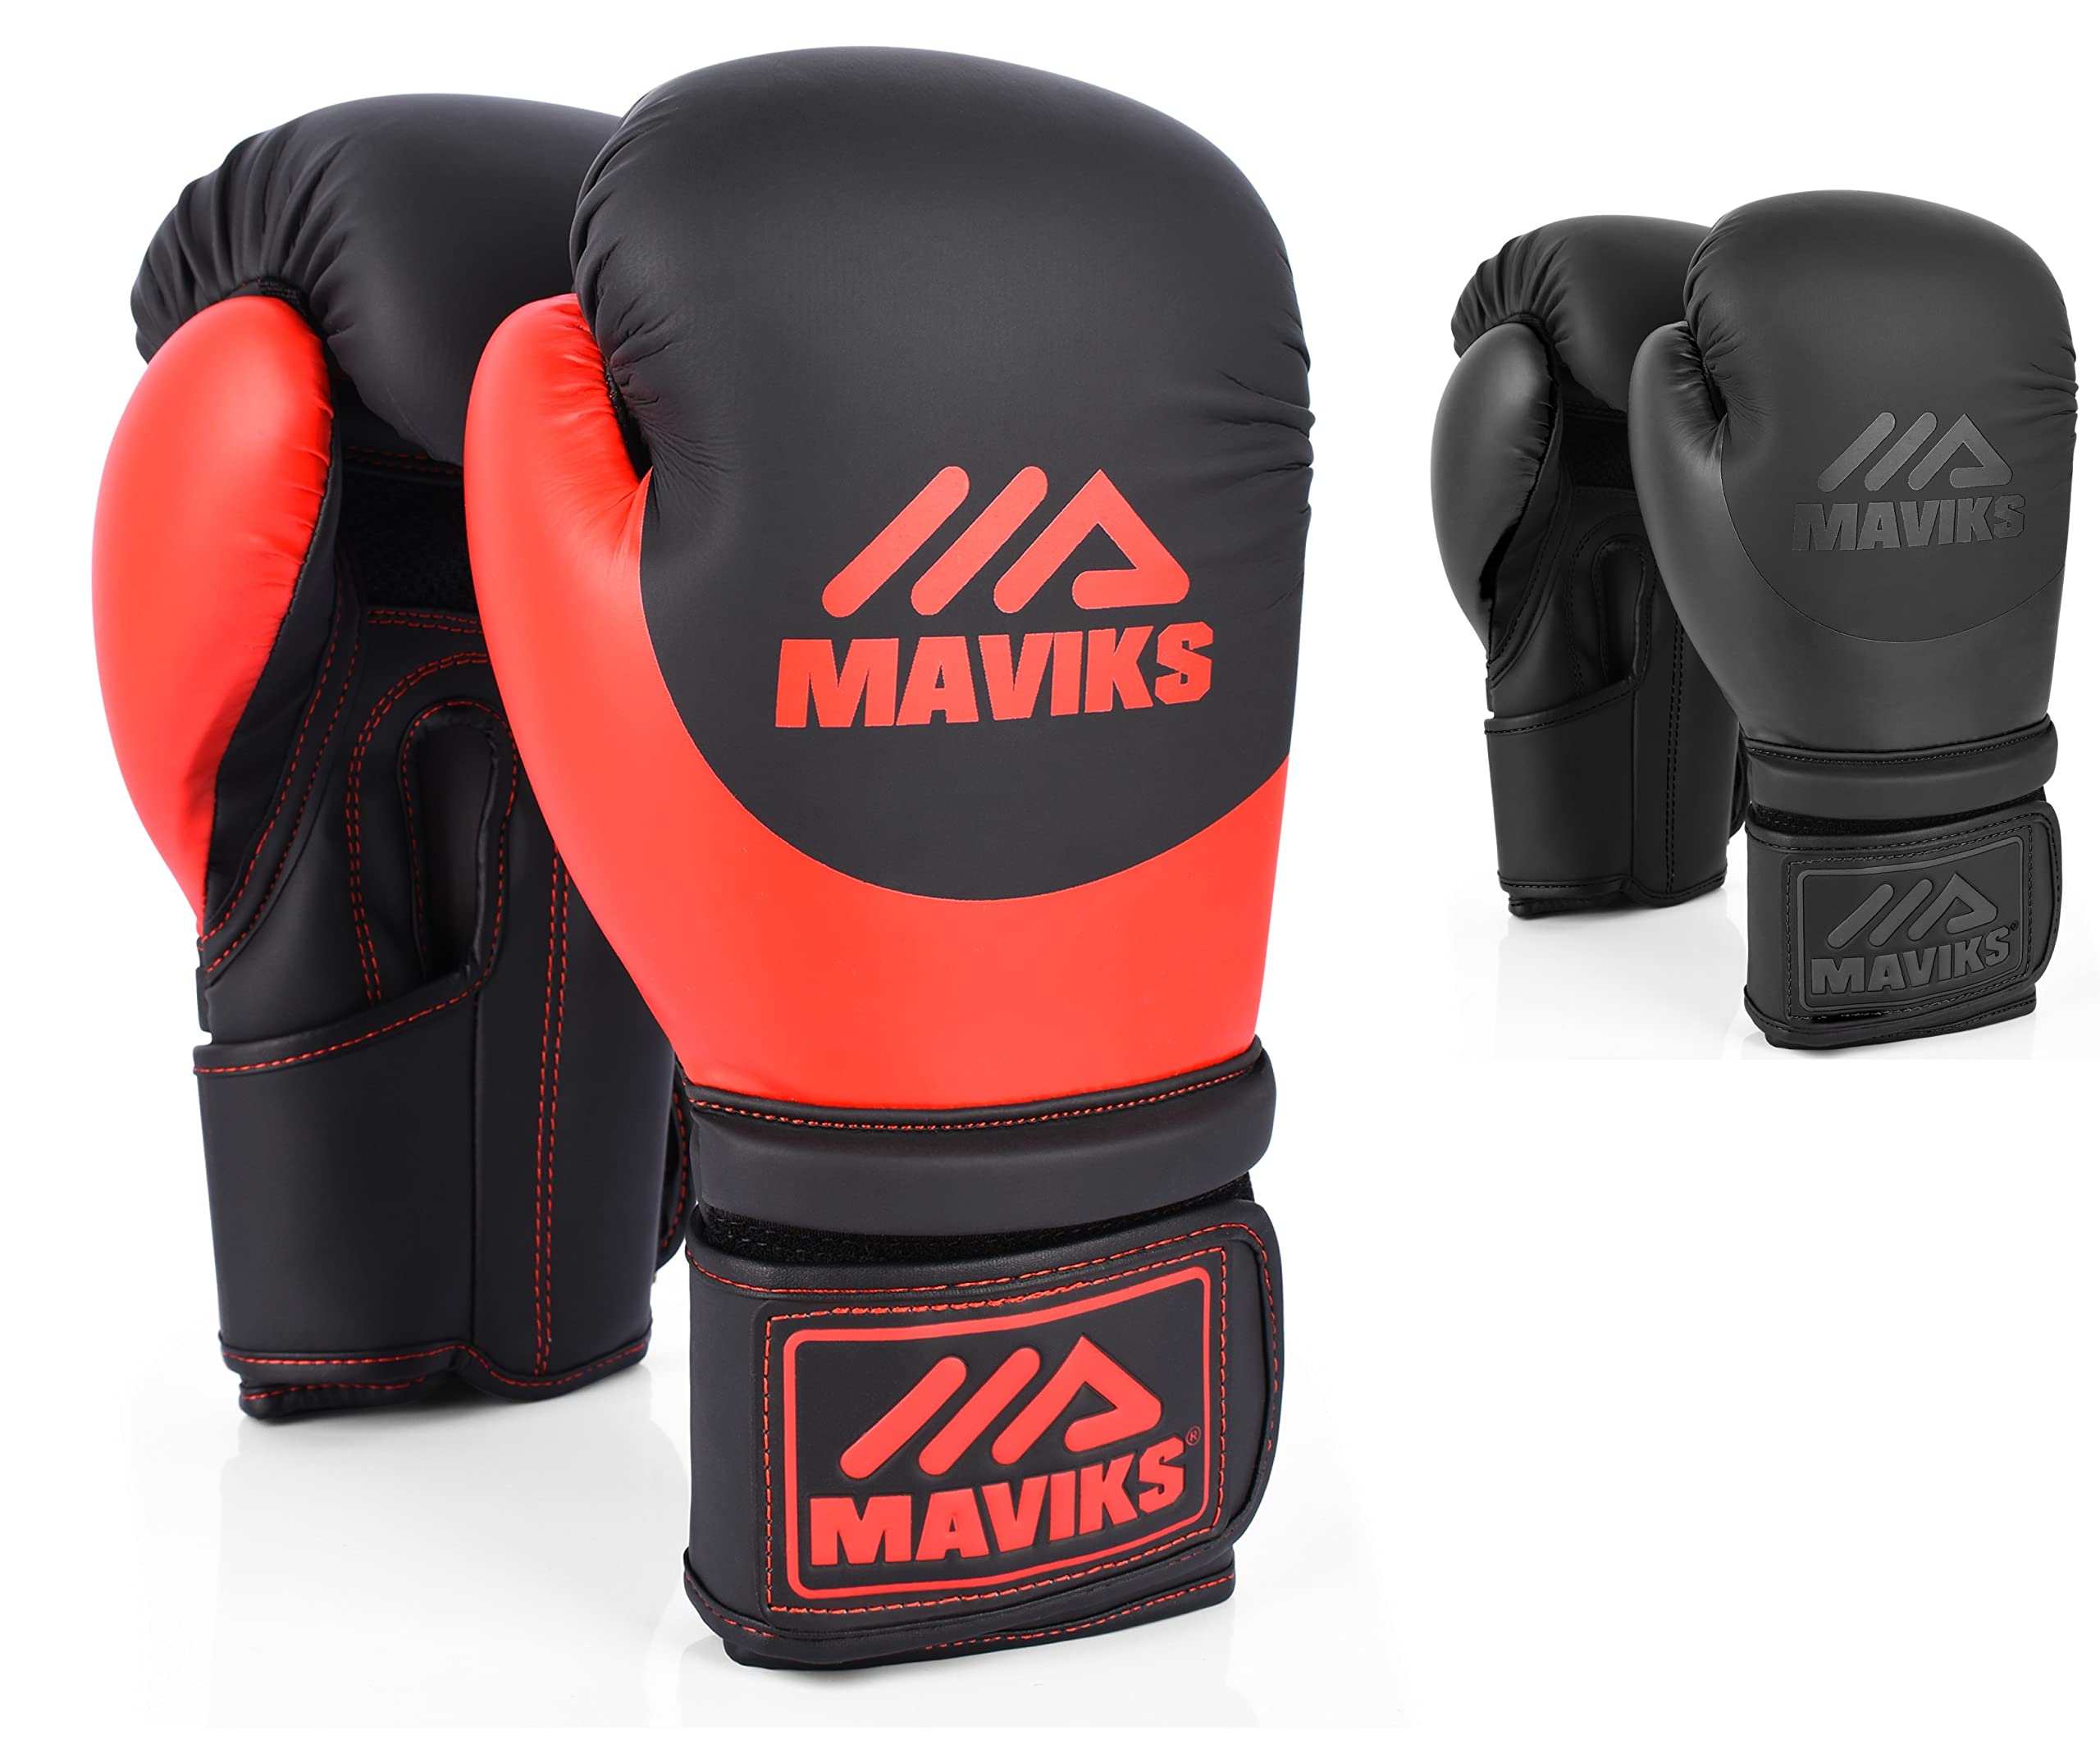 Gloves Bag Women Heavy Red and | MAVIKS oz Muay Heavy Men | Gloves Thai, Sparring, Mitts Workout Non-Toxic Gloves 16 MMA for Bag for Boxing Punching Training, Training